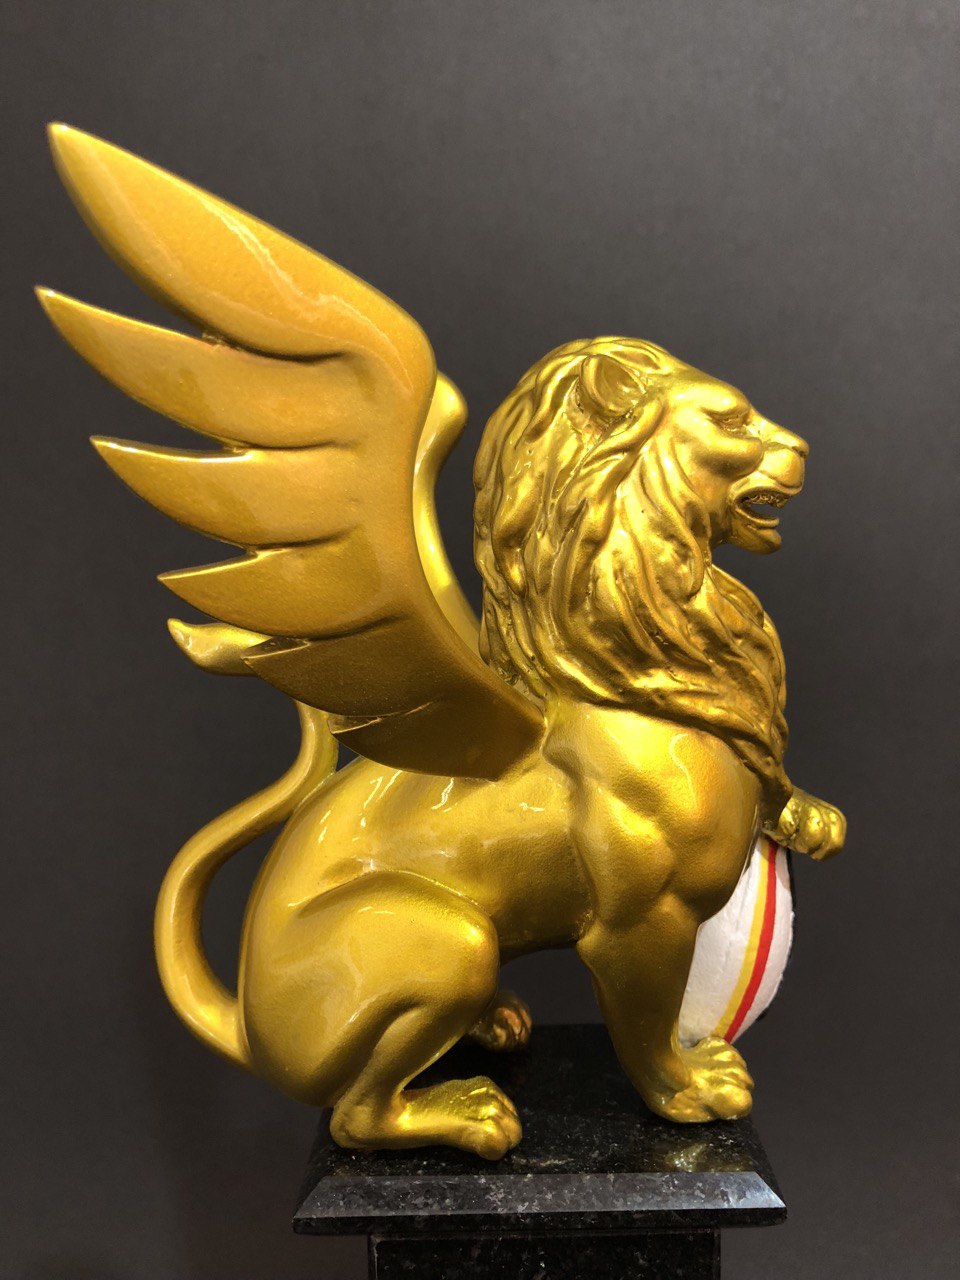 Lion award figurine for the Rugby Federation 